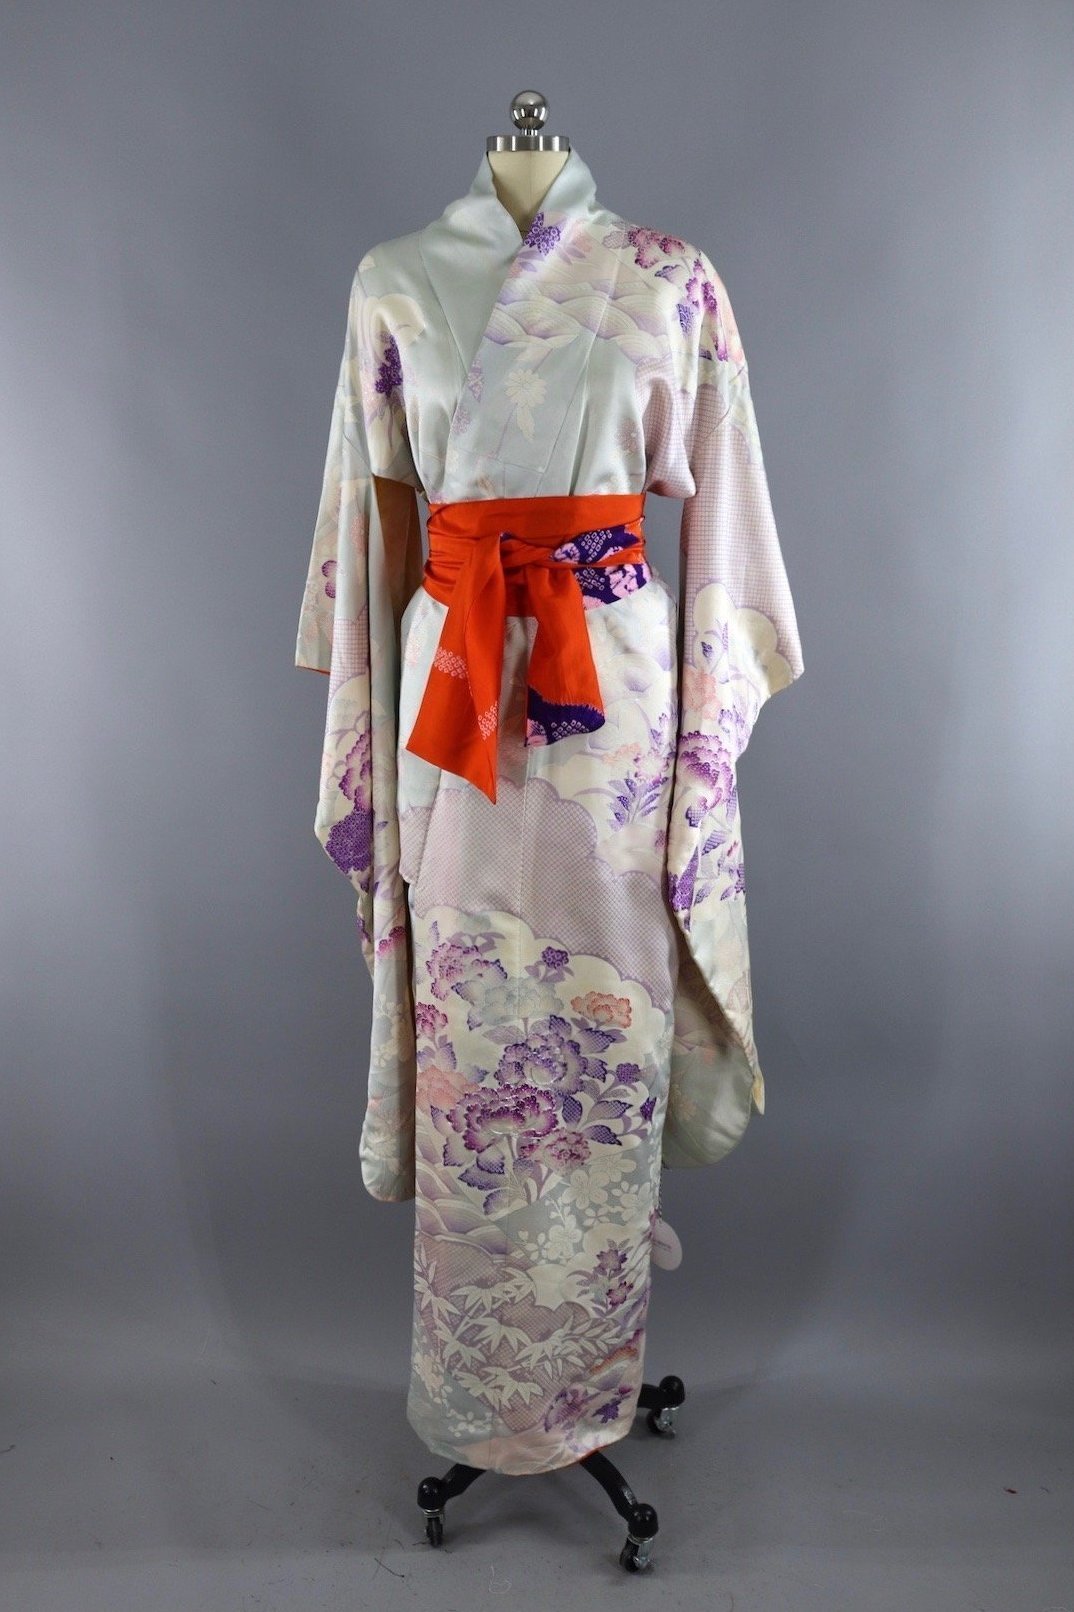 1960s Vintage Silk Kimono Robe in Ice blue and Lavender Floral